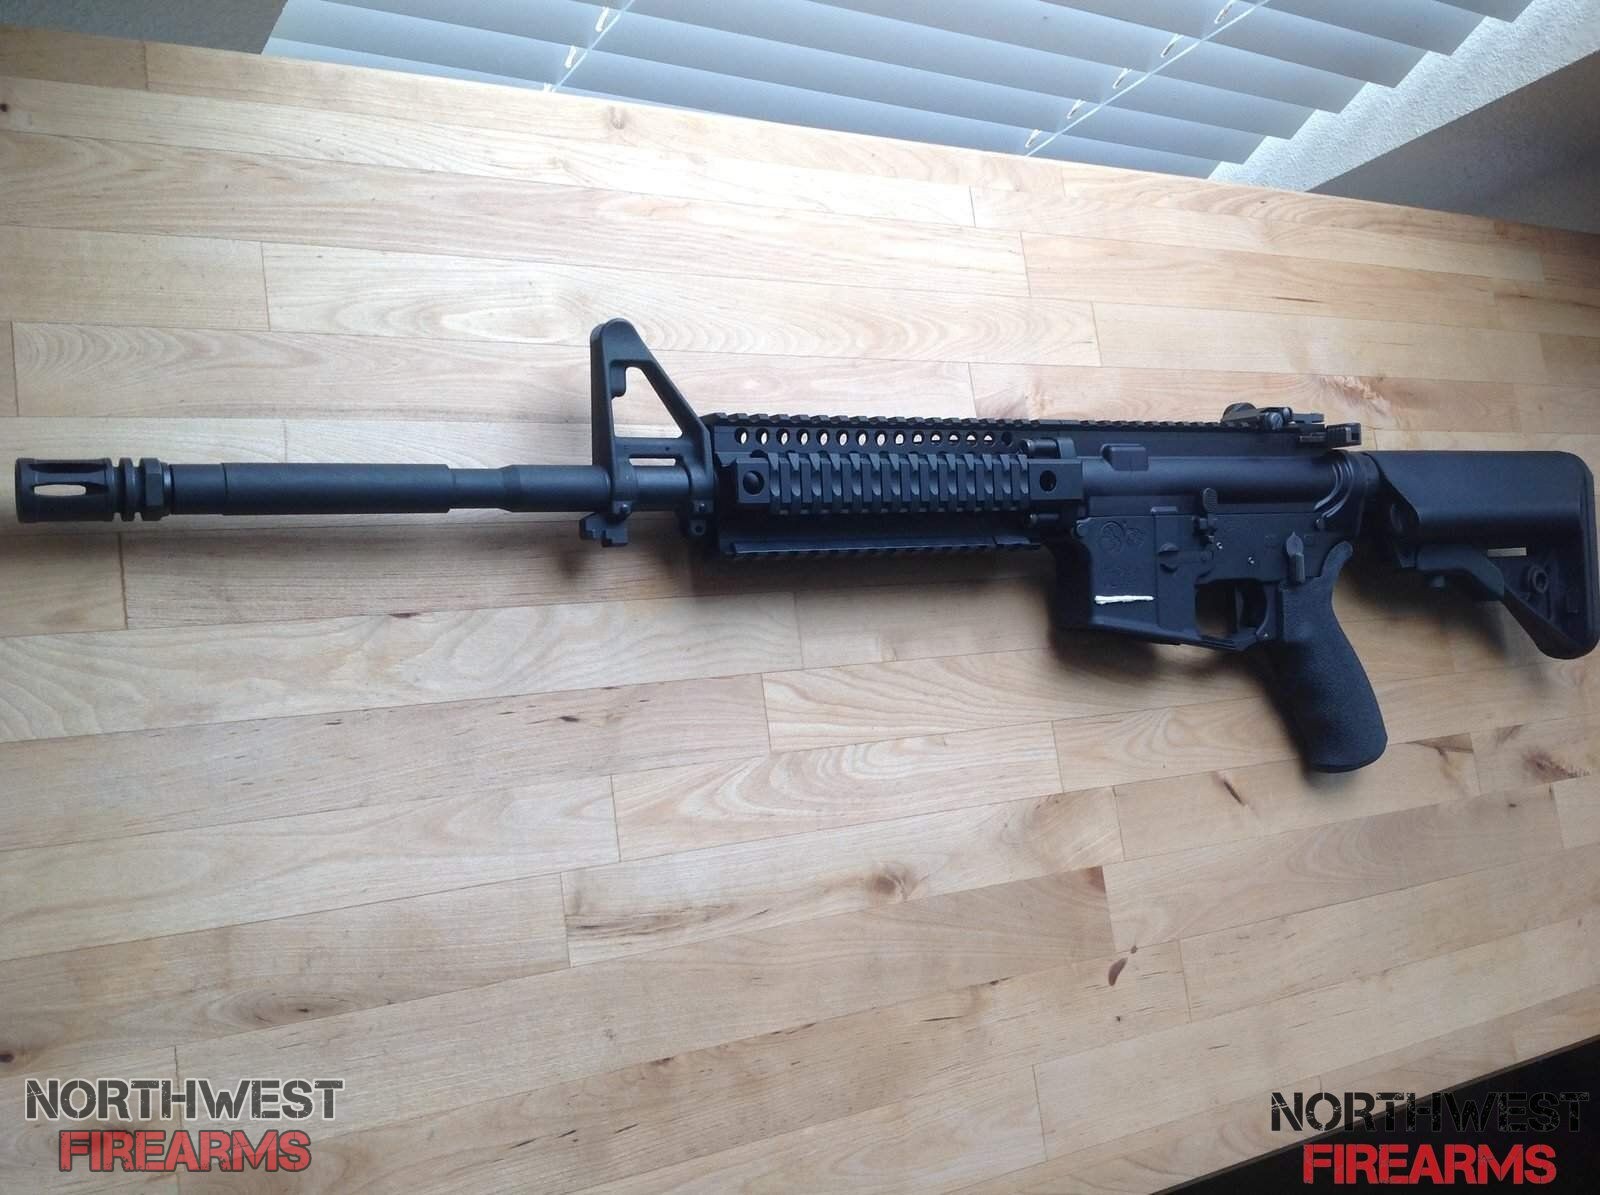 Colt 6920 M4 Carbine 5.56x45 selling for $1000